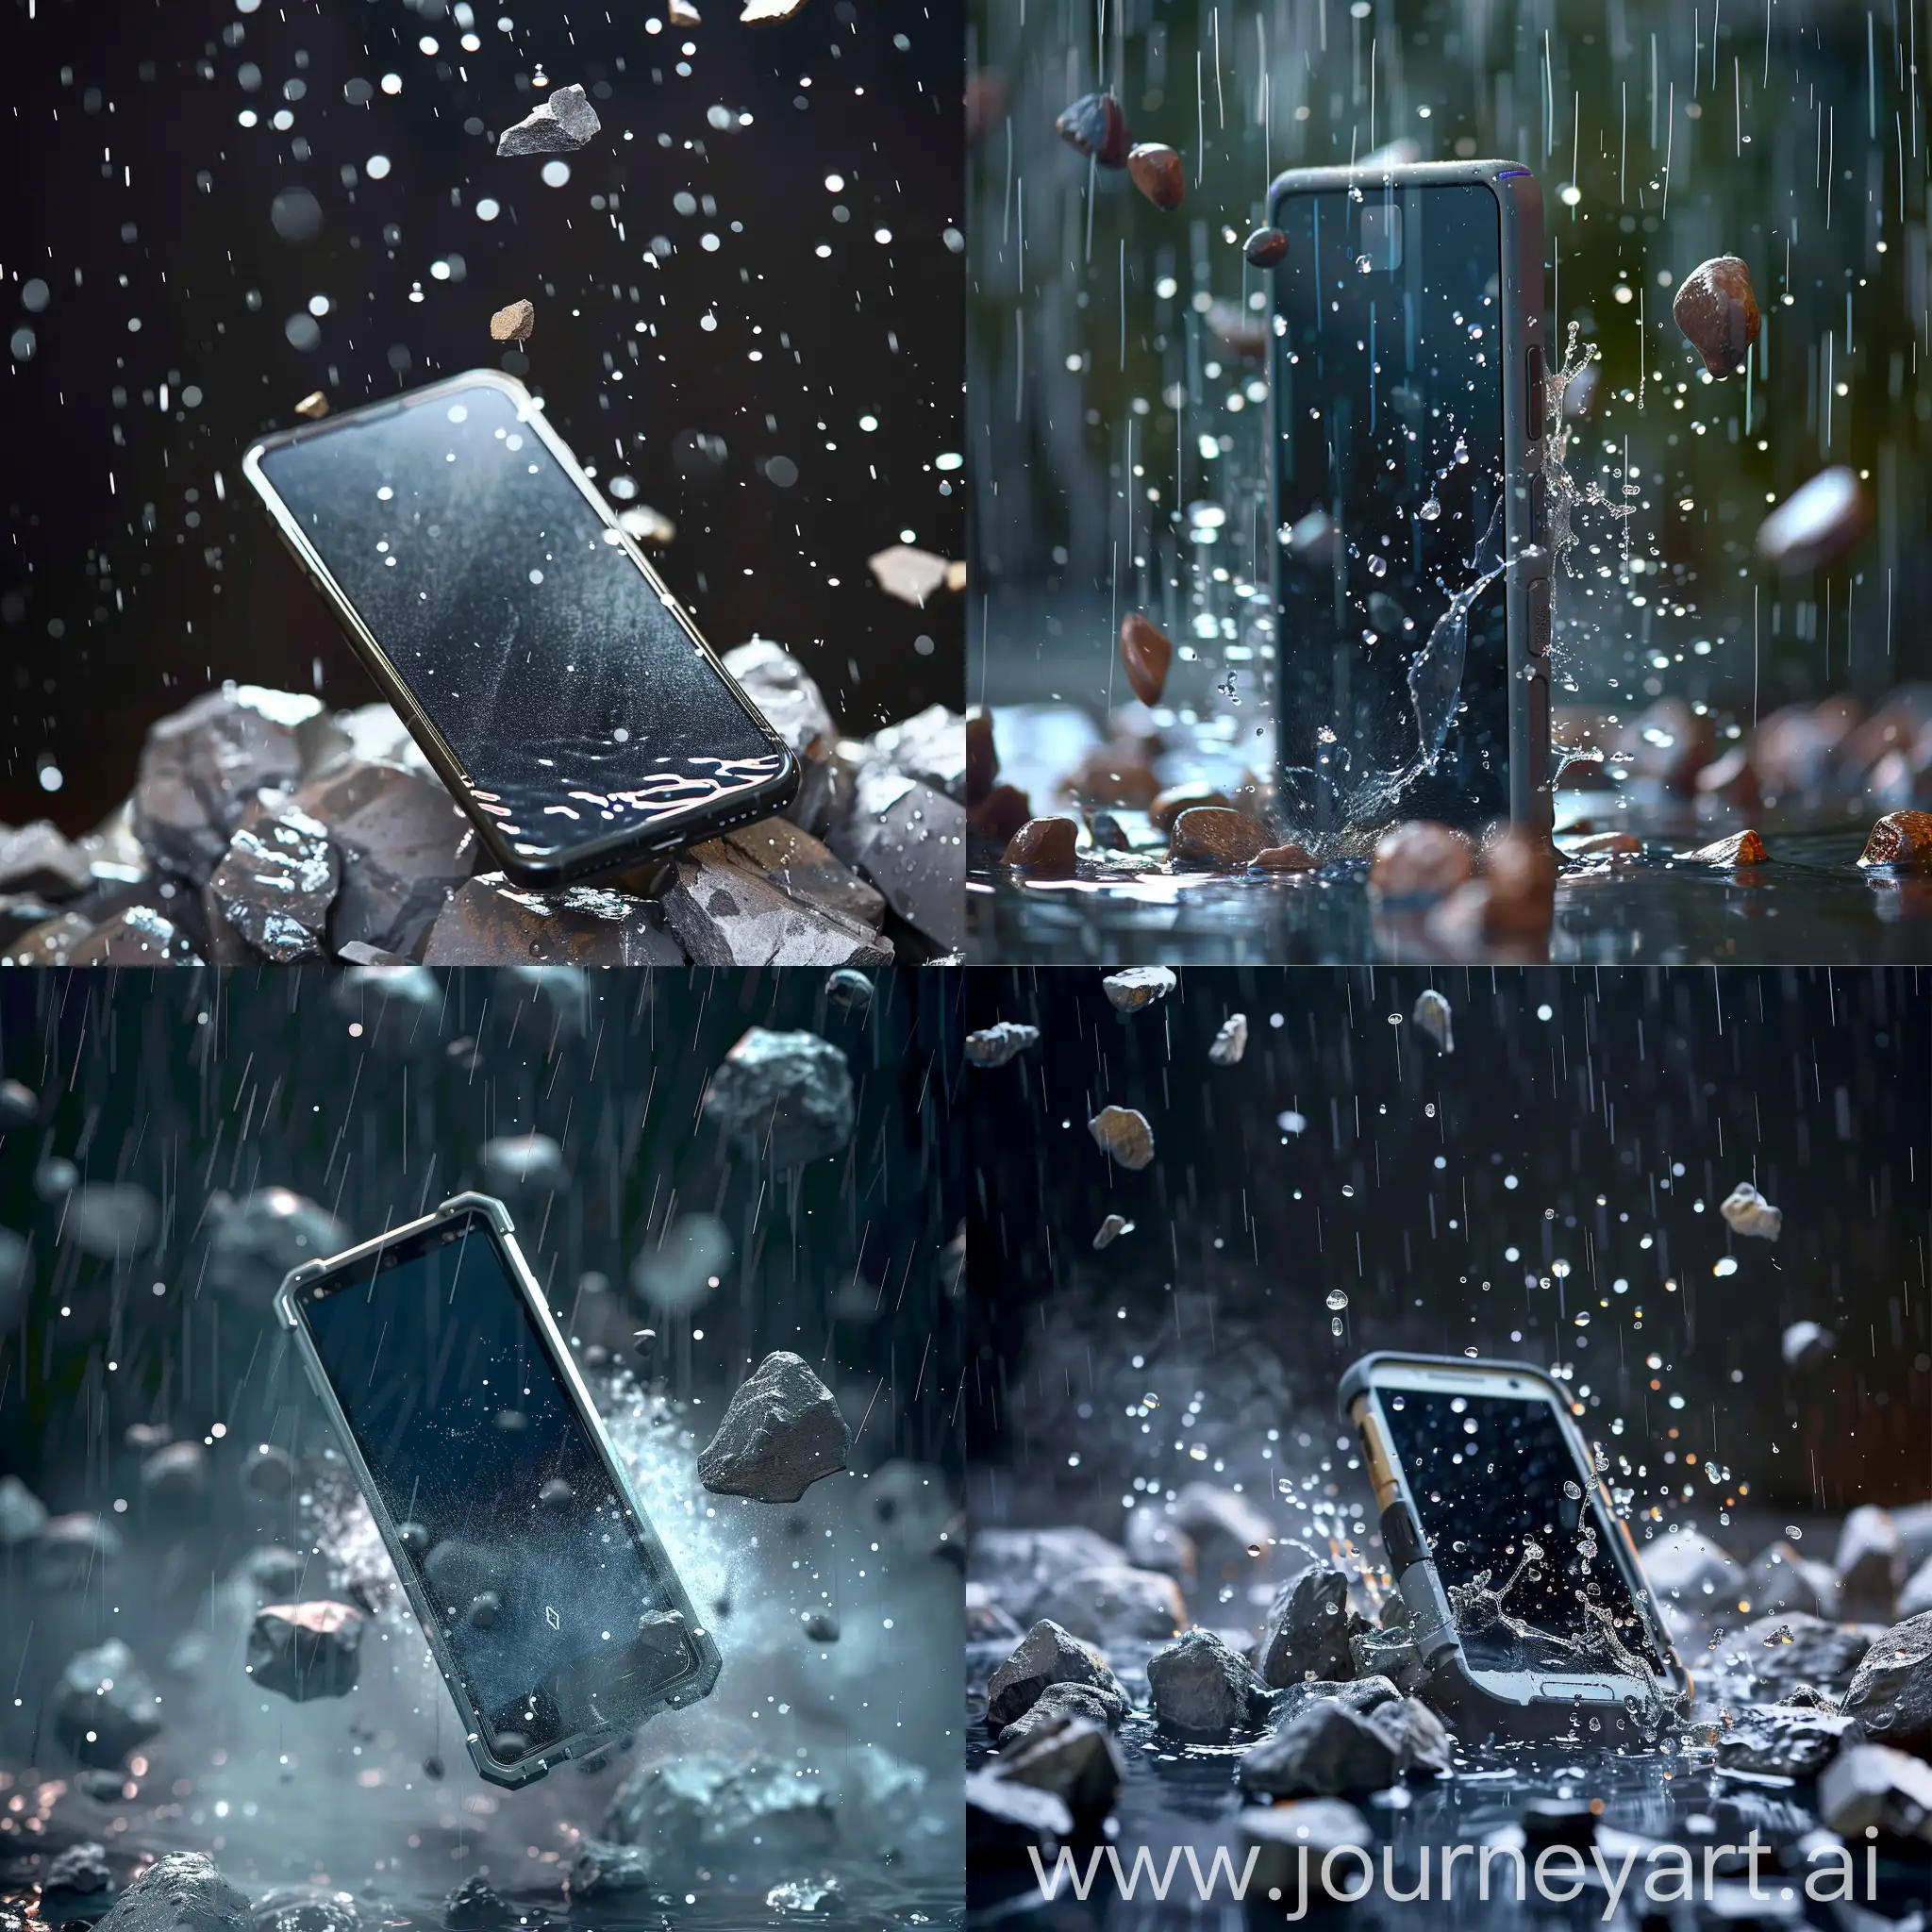 An image of a mobile phone with its screen facing the air and rain and stones falling on it from the air can be seen as its resistance.